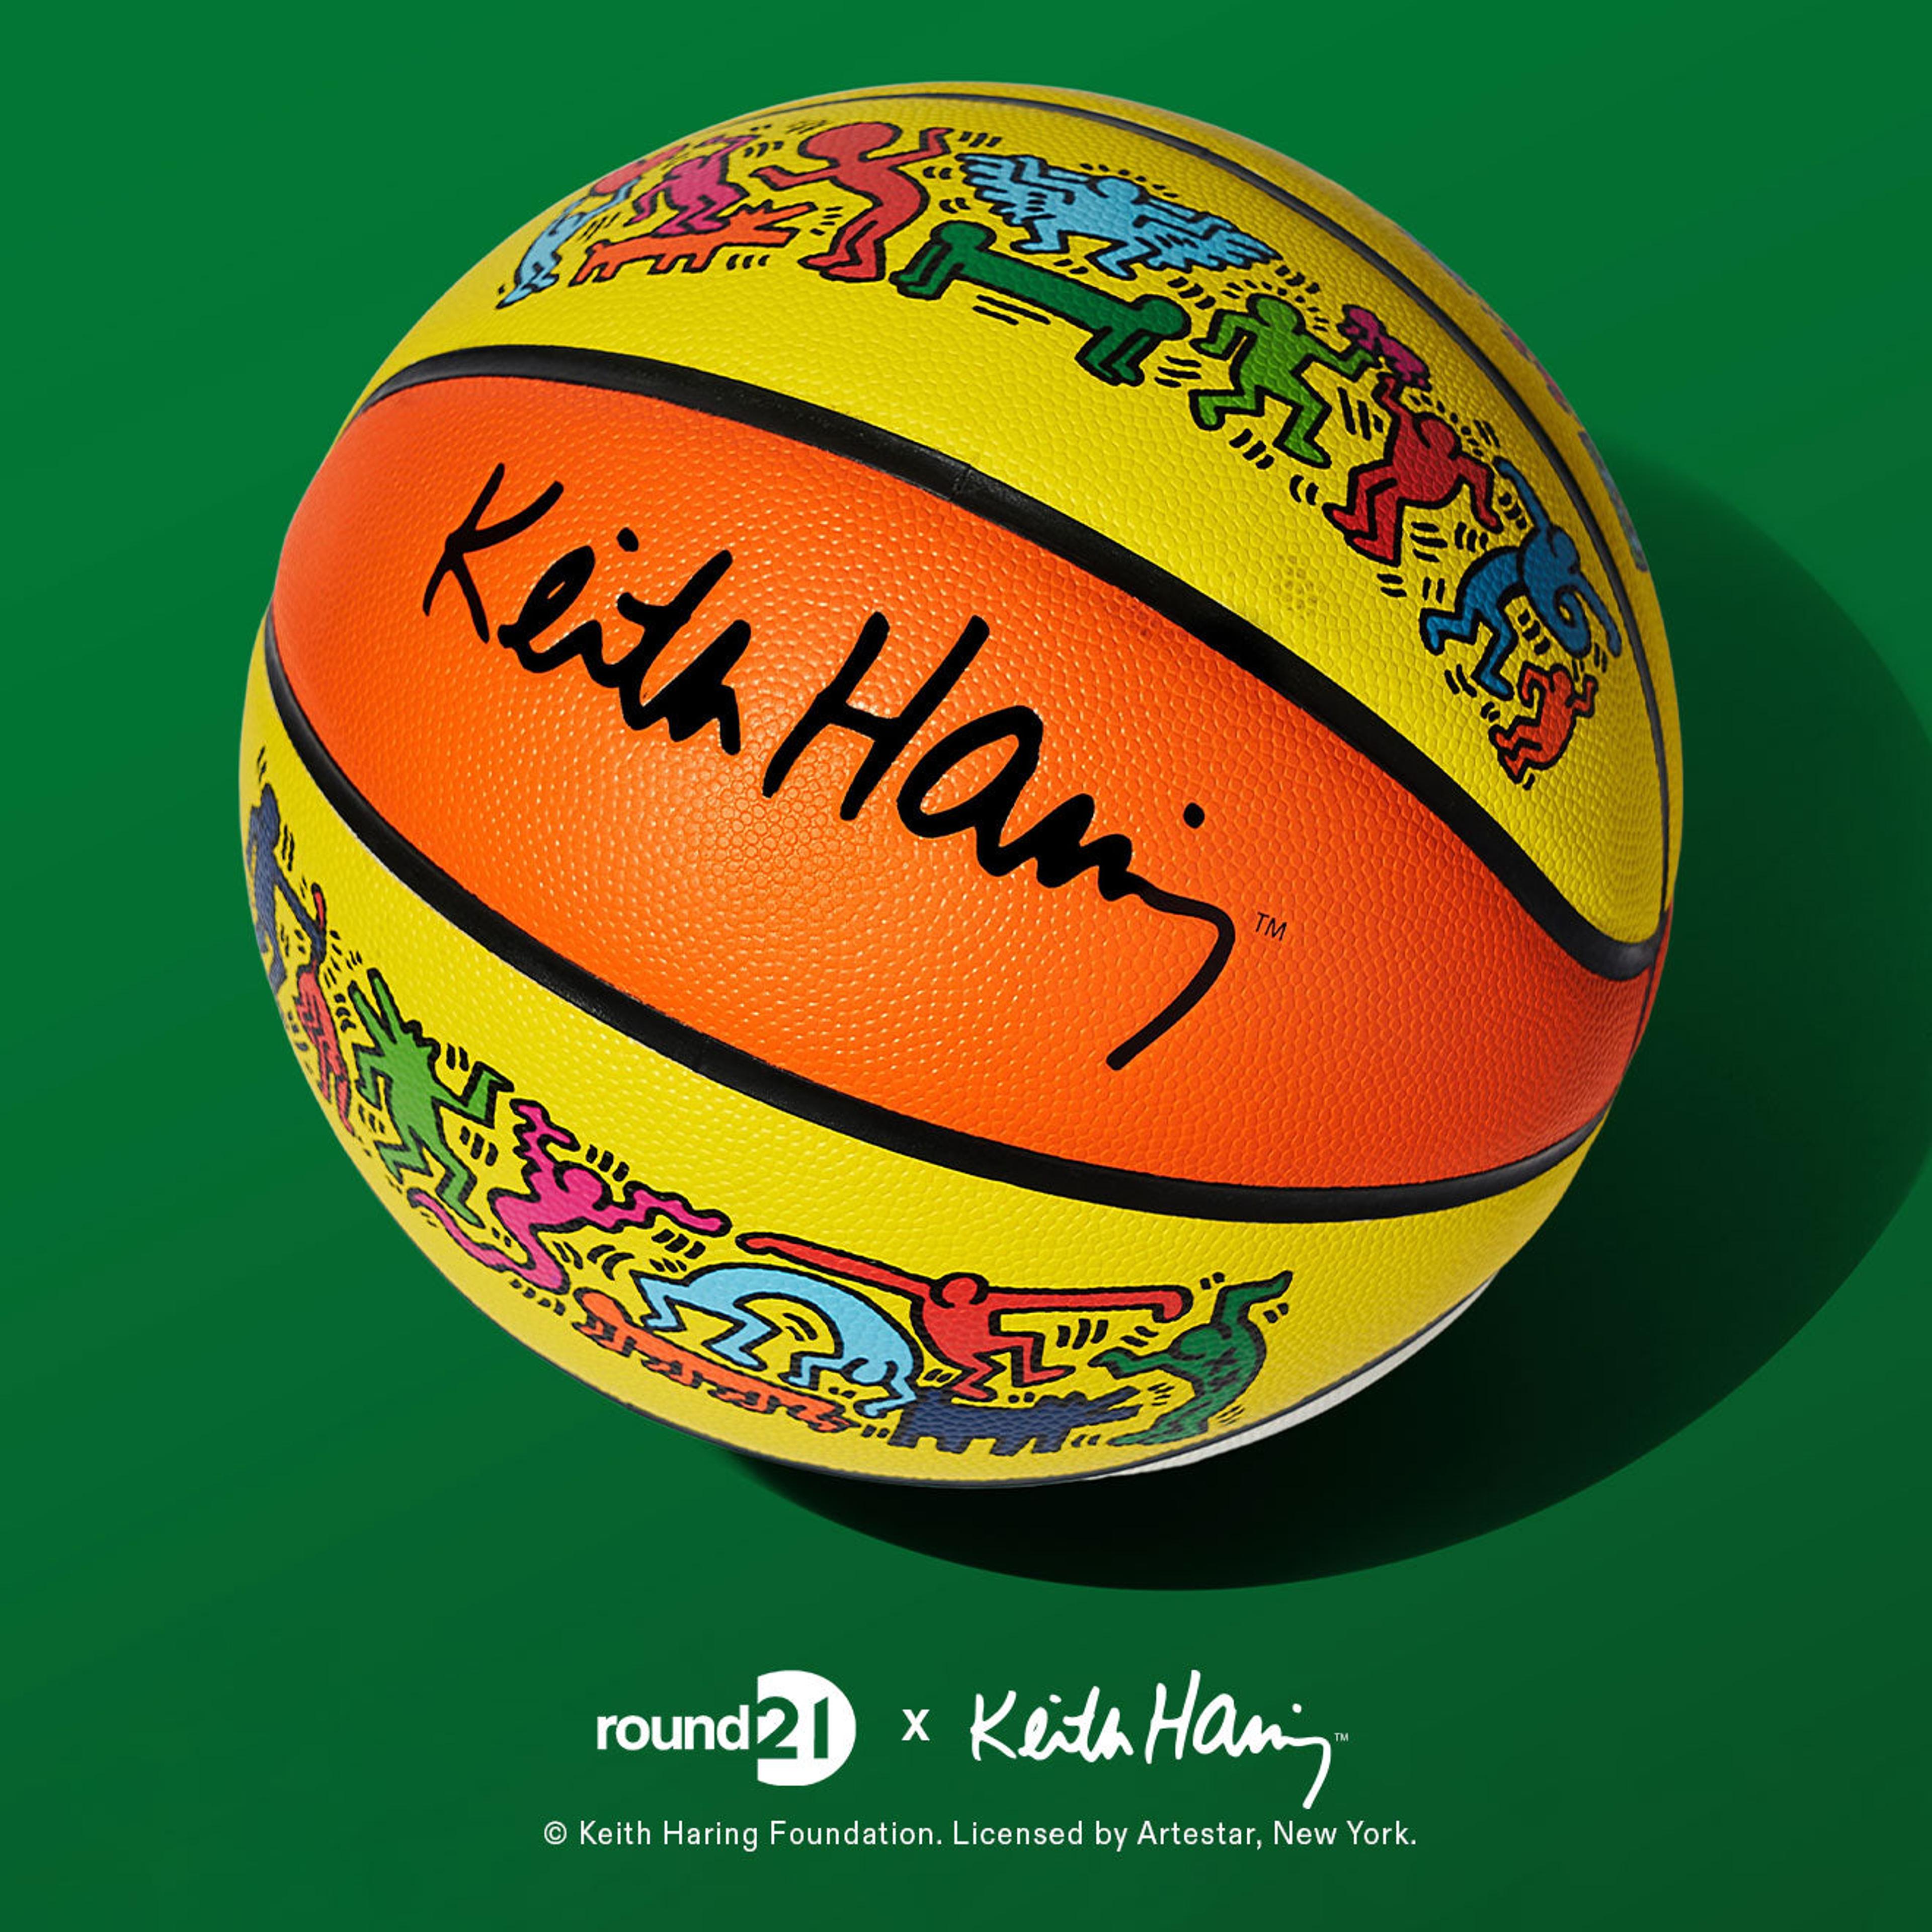 Keith Haring “All Are Welcome” Basketball